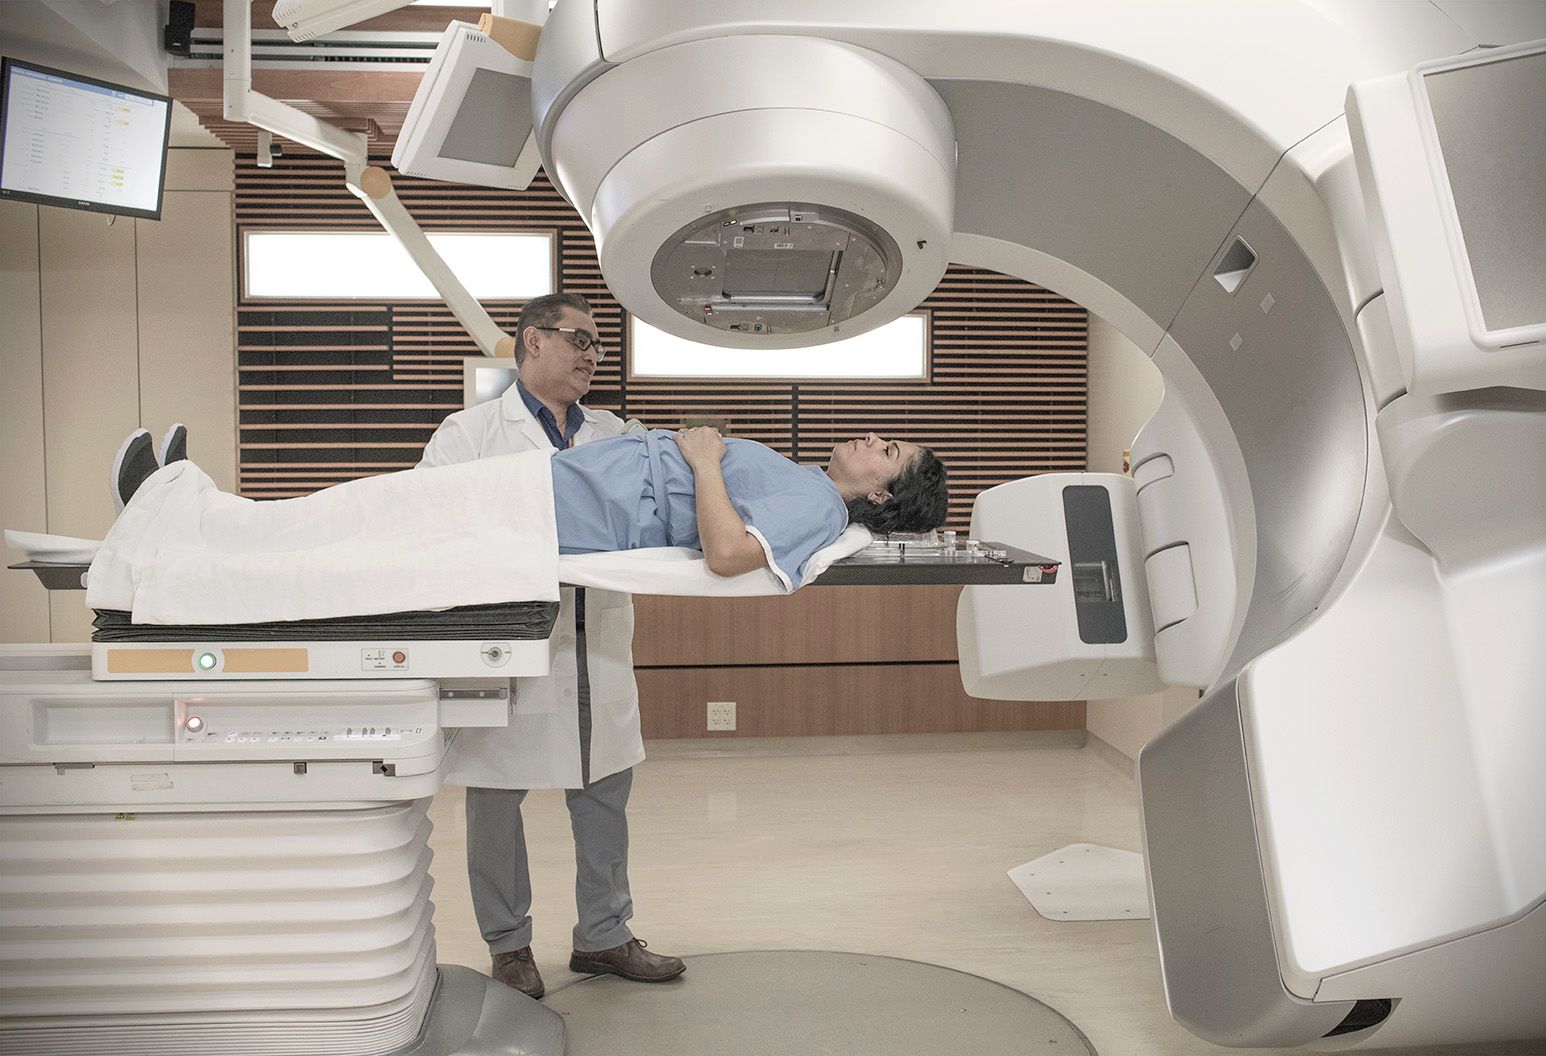 Radiation treatment for breast cancer: What to expect